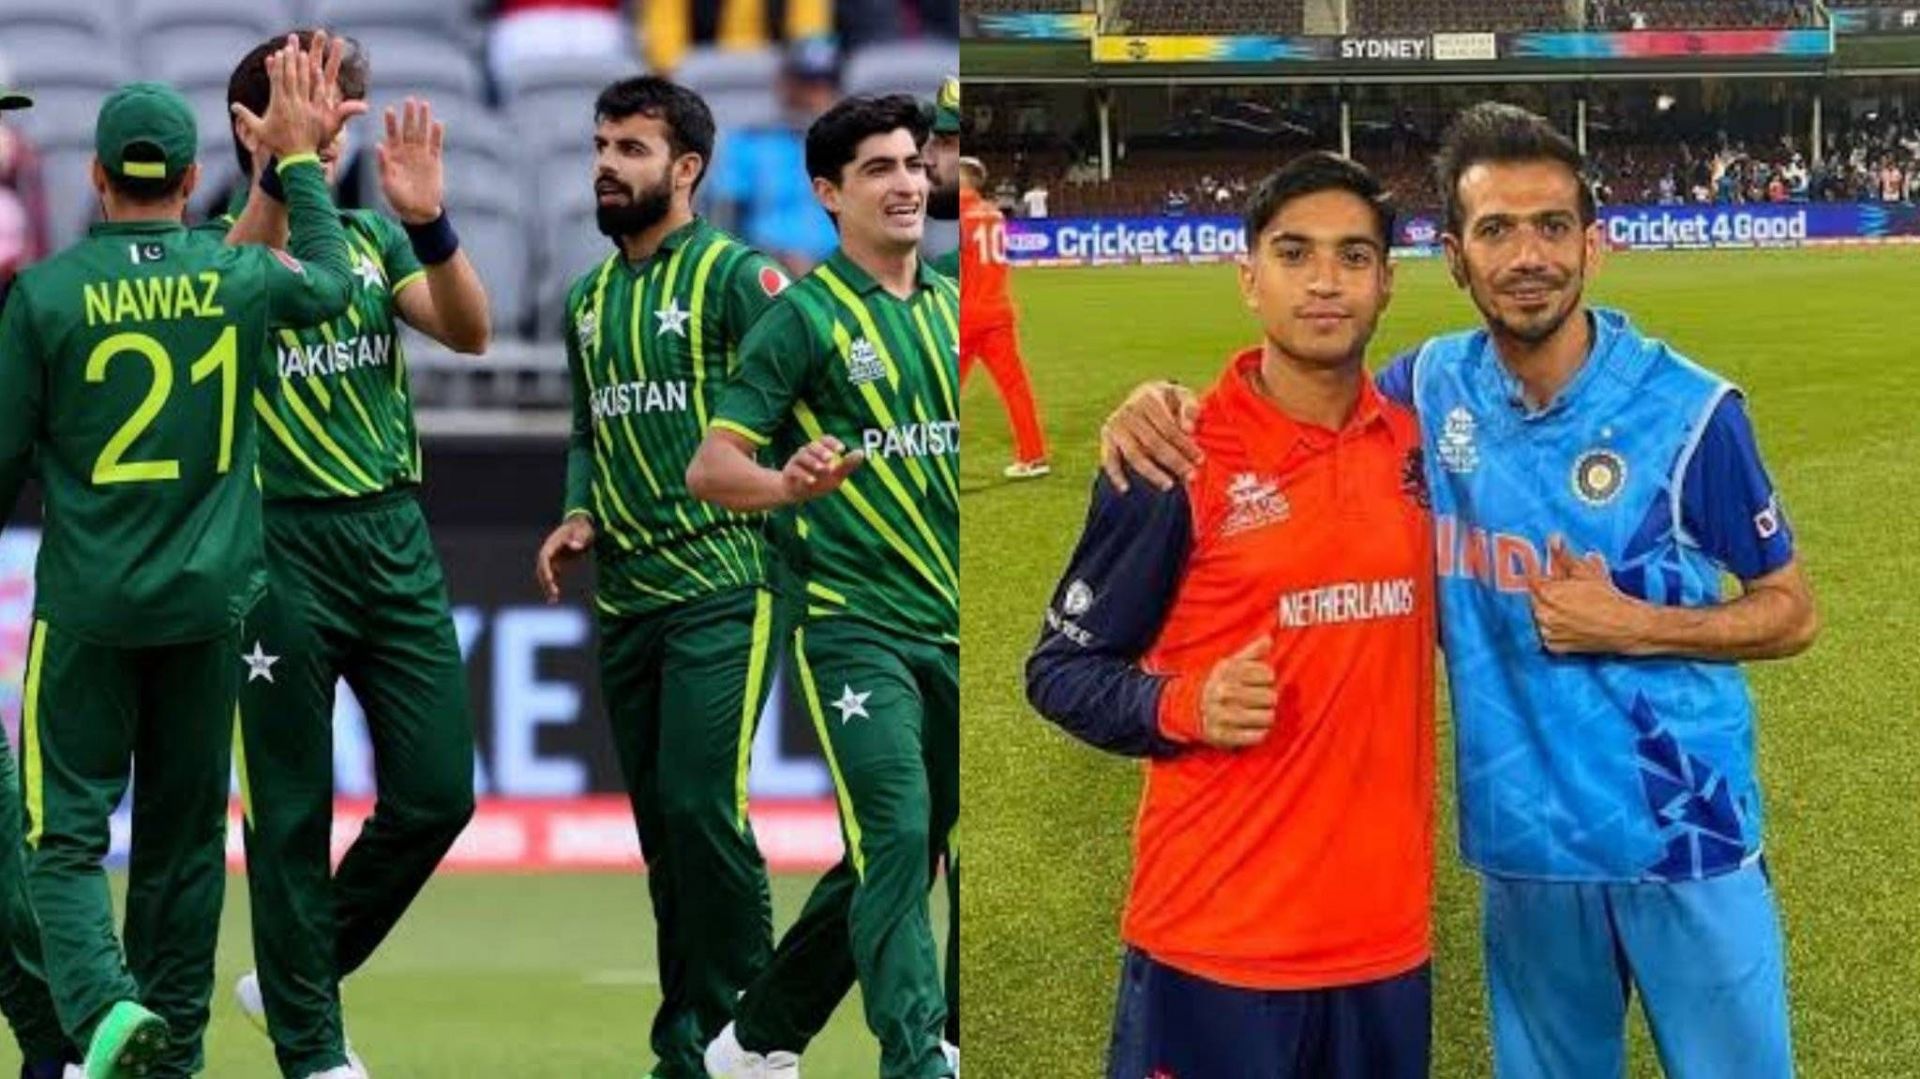 Shariz Ahmad is a Pakistan origin cricketer who plays for the Netherlands